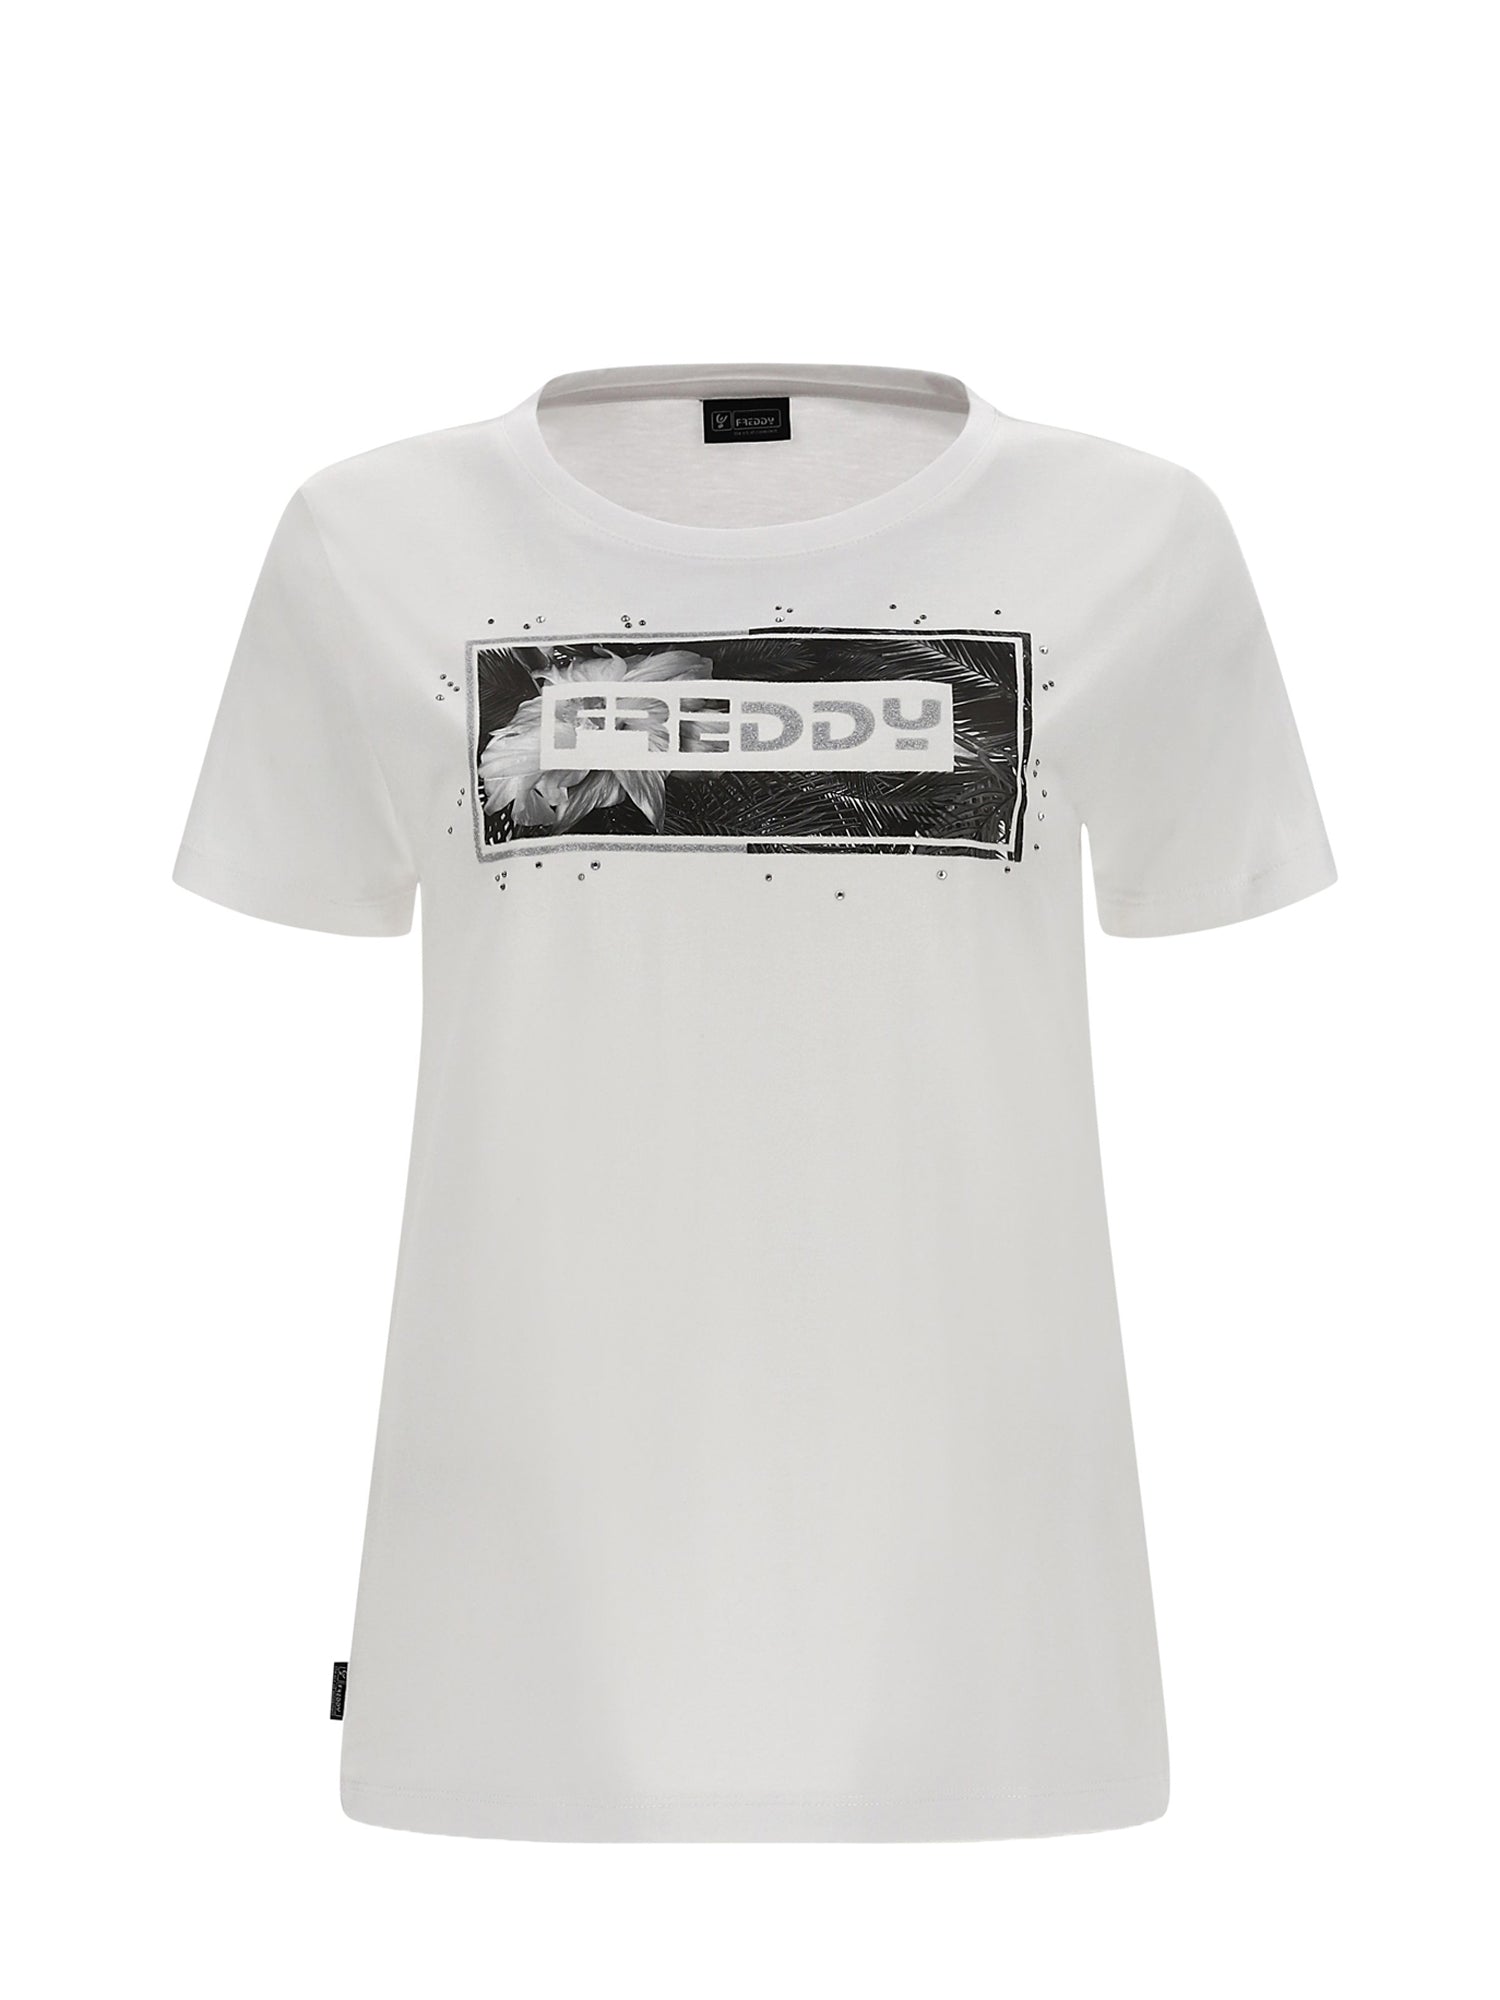 FREDDY T-SHIRT CON STAMPA FLOREALE BIANCO